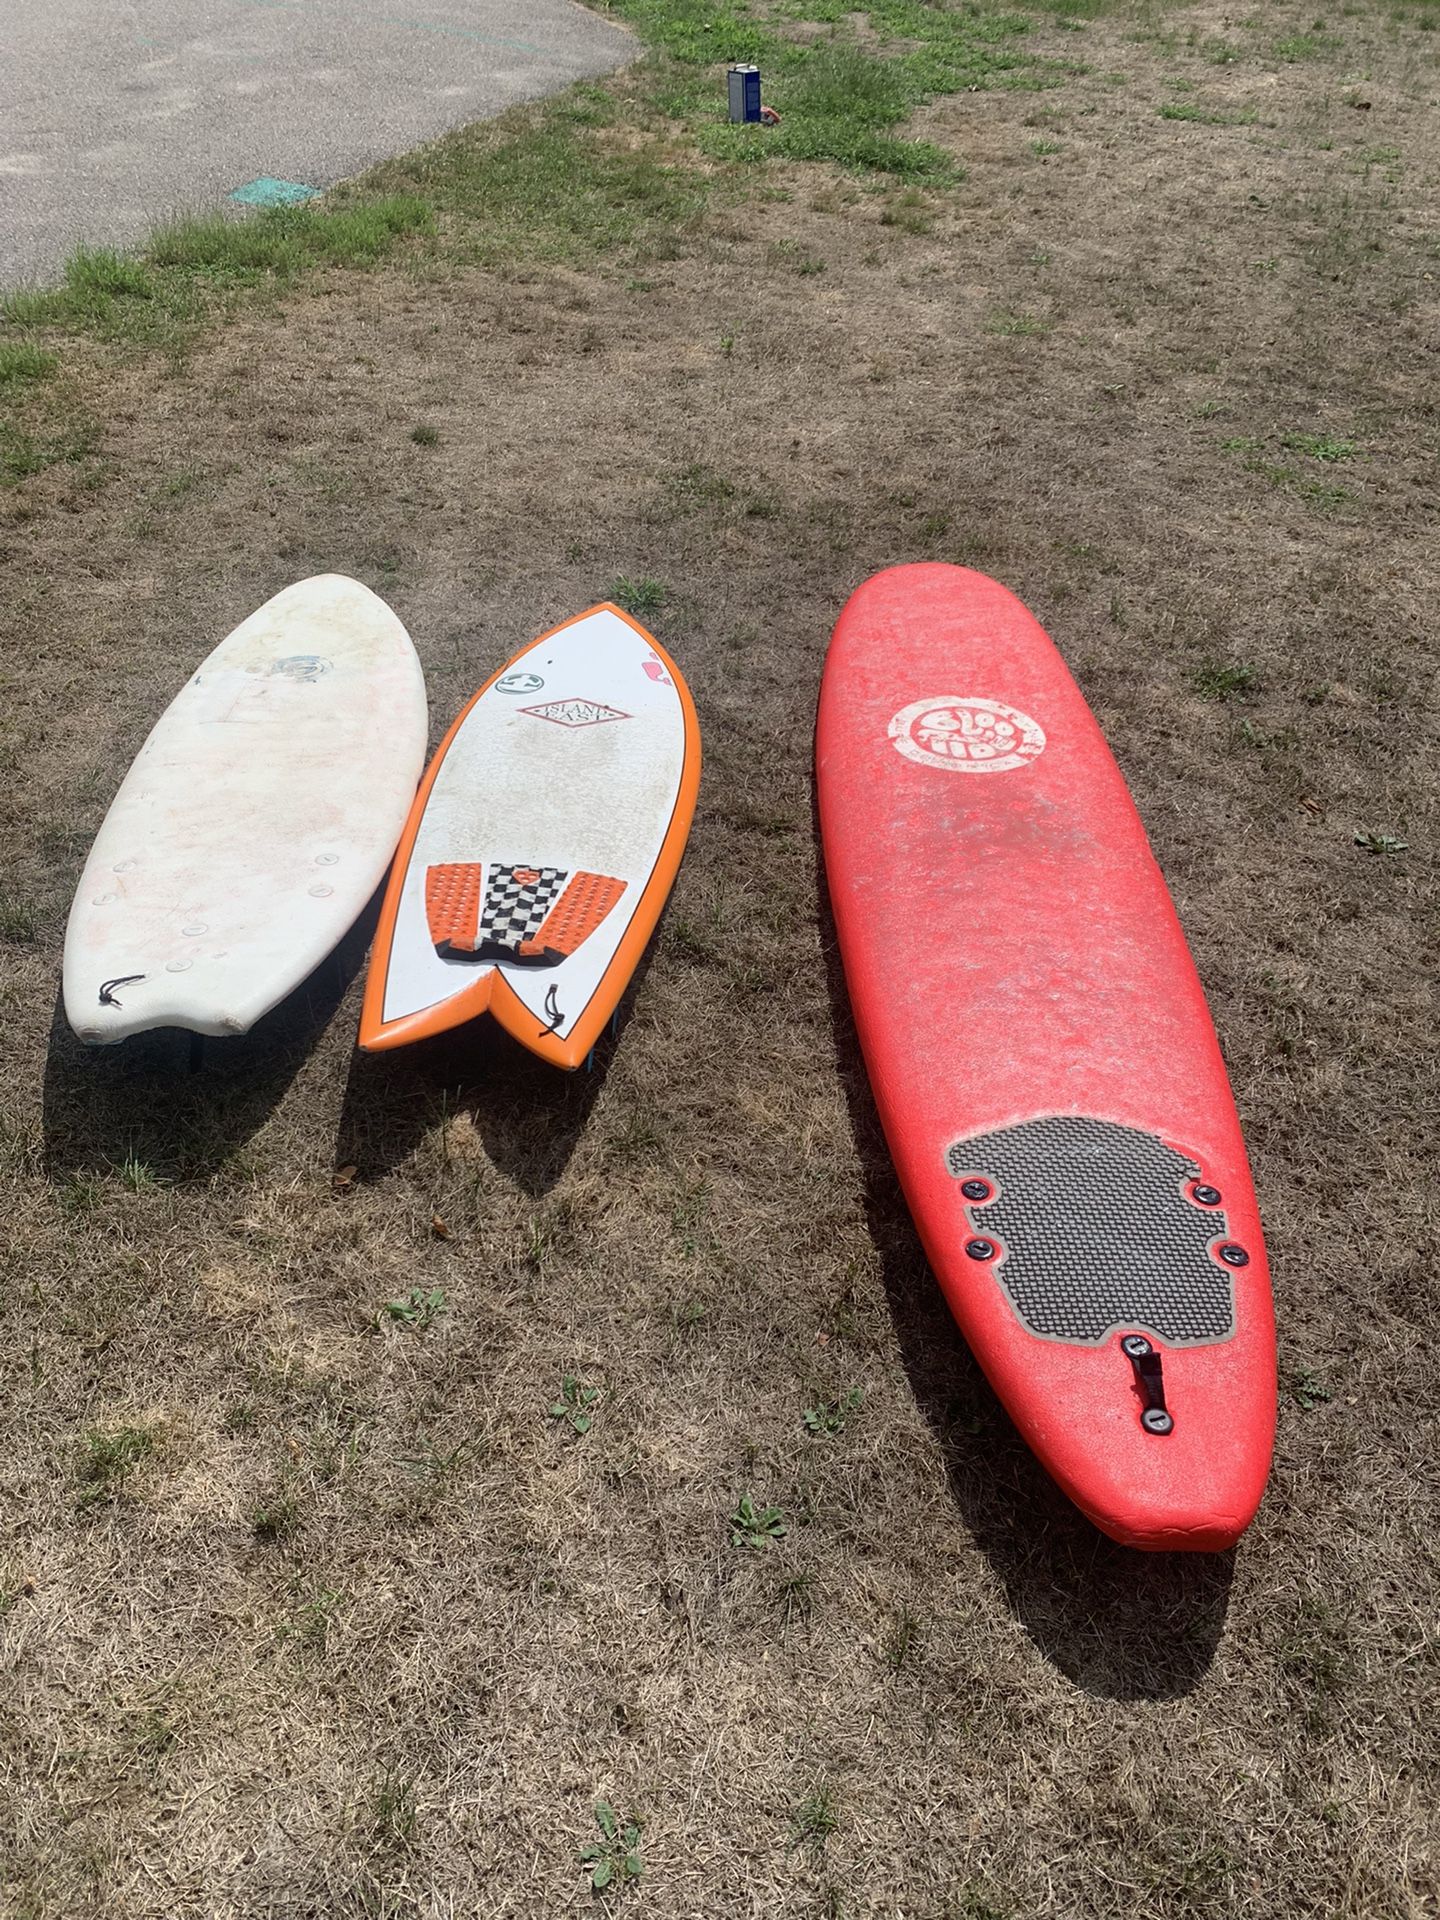 surfboards for sale